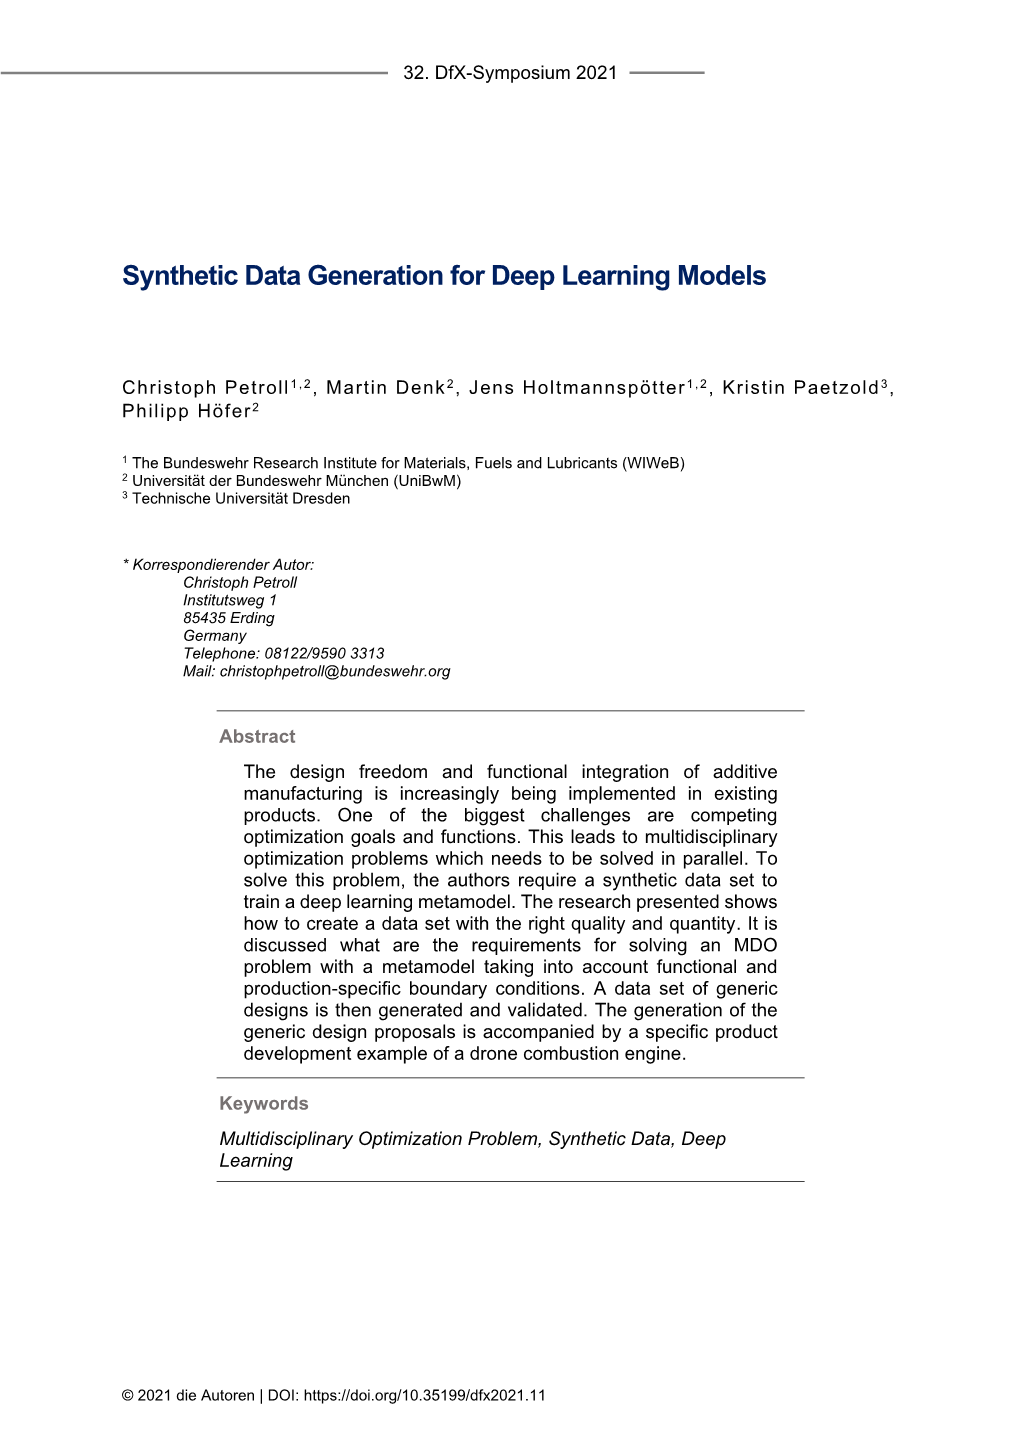 Synthetic Data Generation for Deep Learning Models